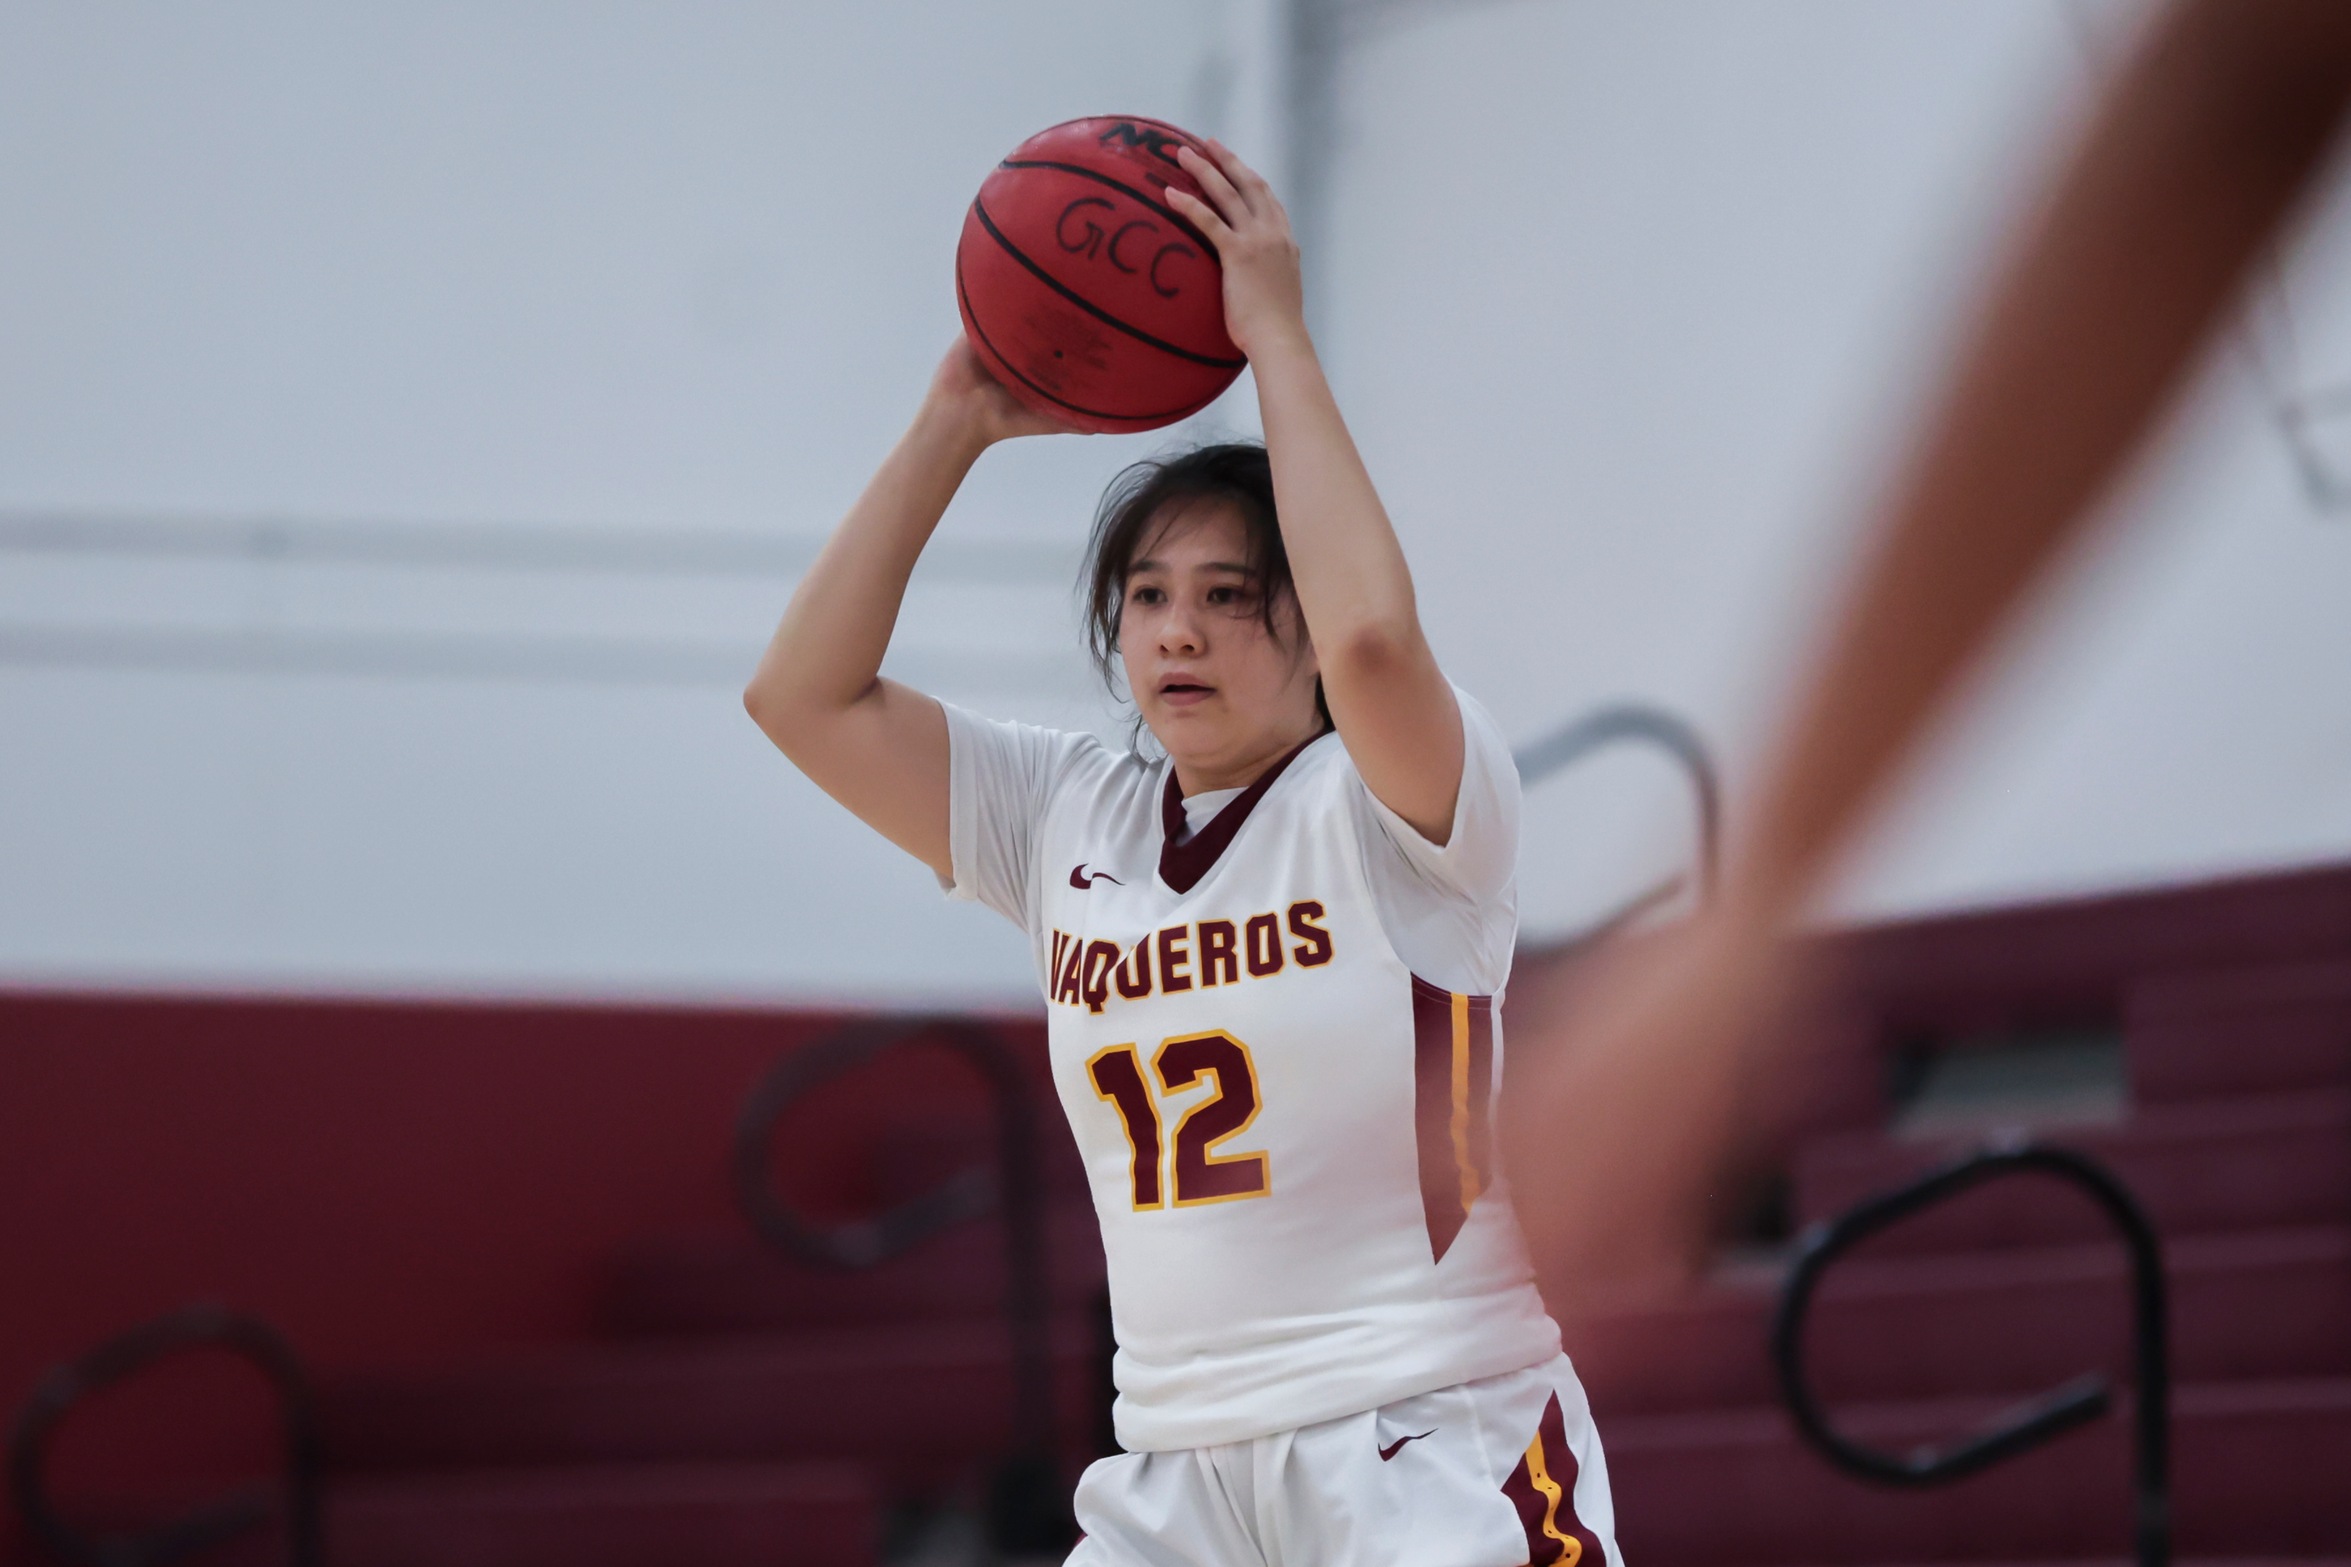 GCC Women's Basketball Team wins two games in home crossover event Nov. 19-20